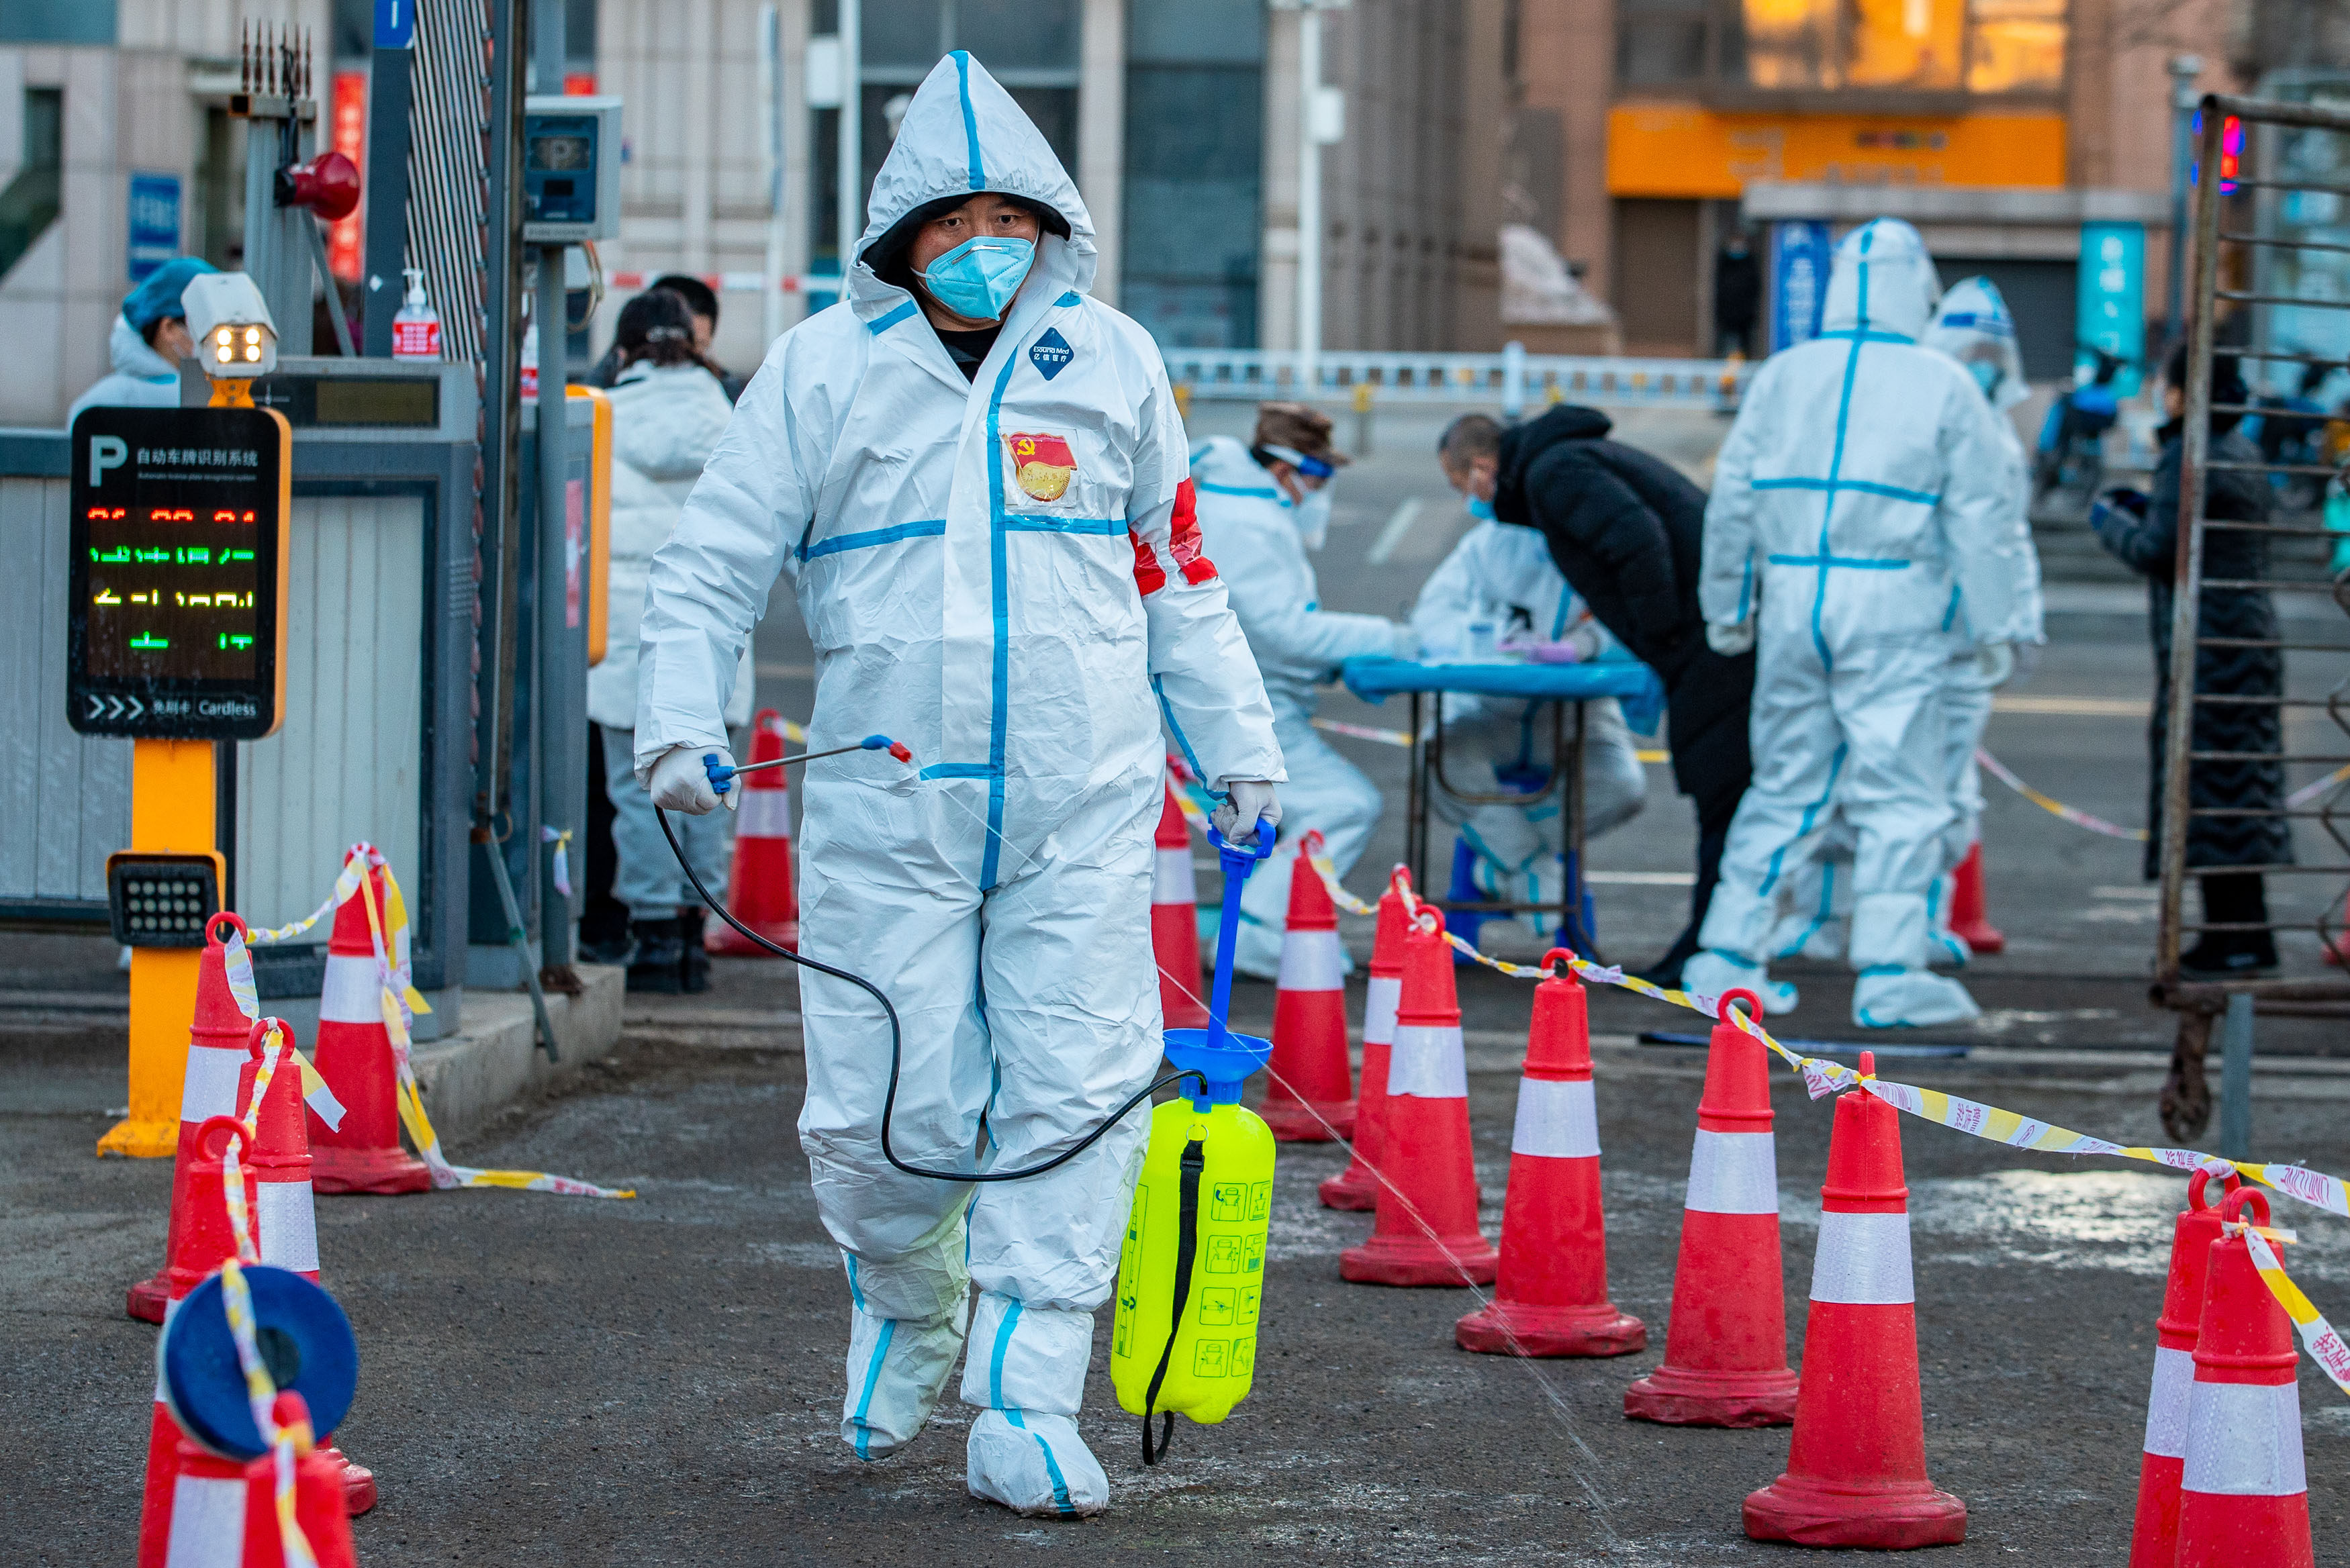 Volunteers disinfect a temporary Covid-19 testing site in Hohhot, Inner Mongolia, in late February 23. The region has been struck by a number of outbreaks this year. Photo: Costfoto/Future Publishing via Getty Images